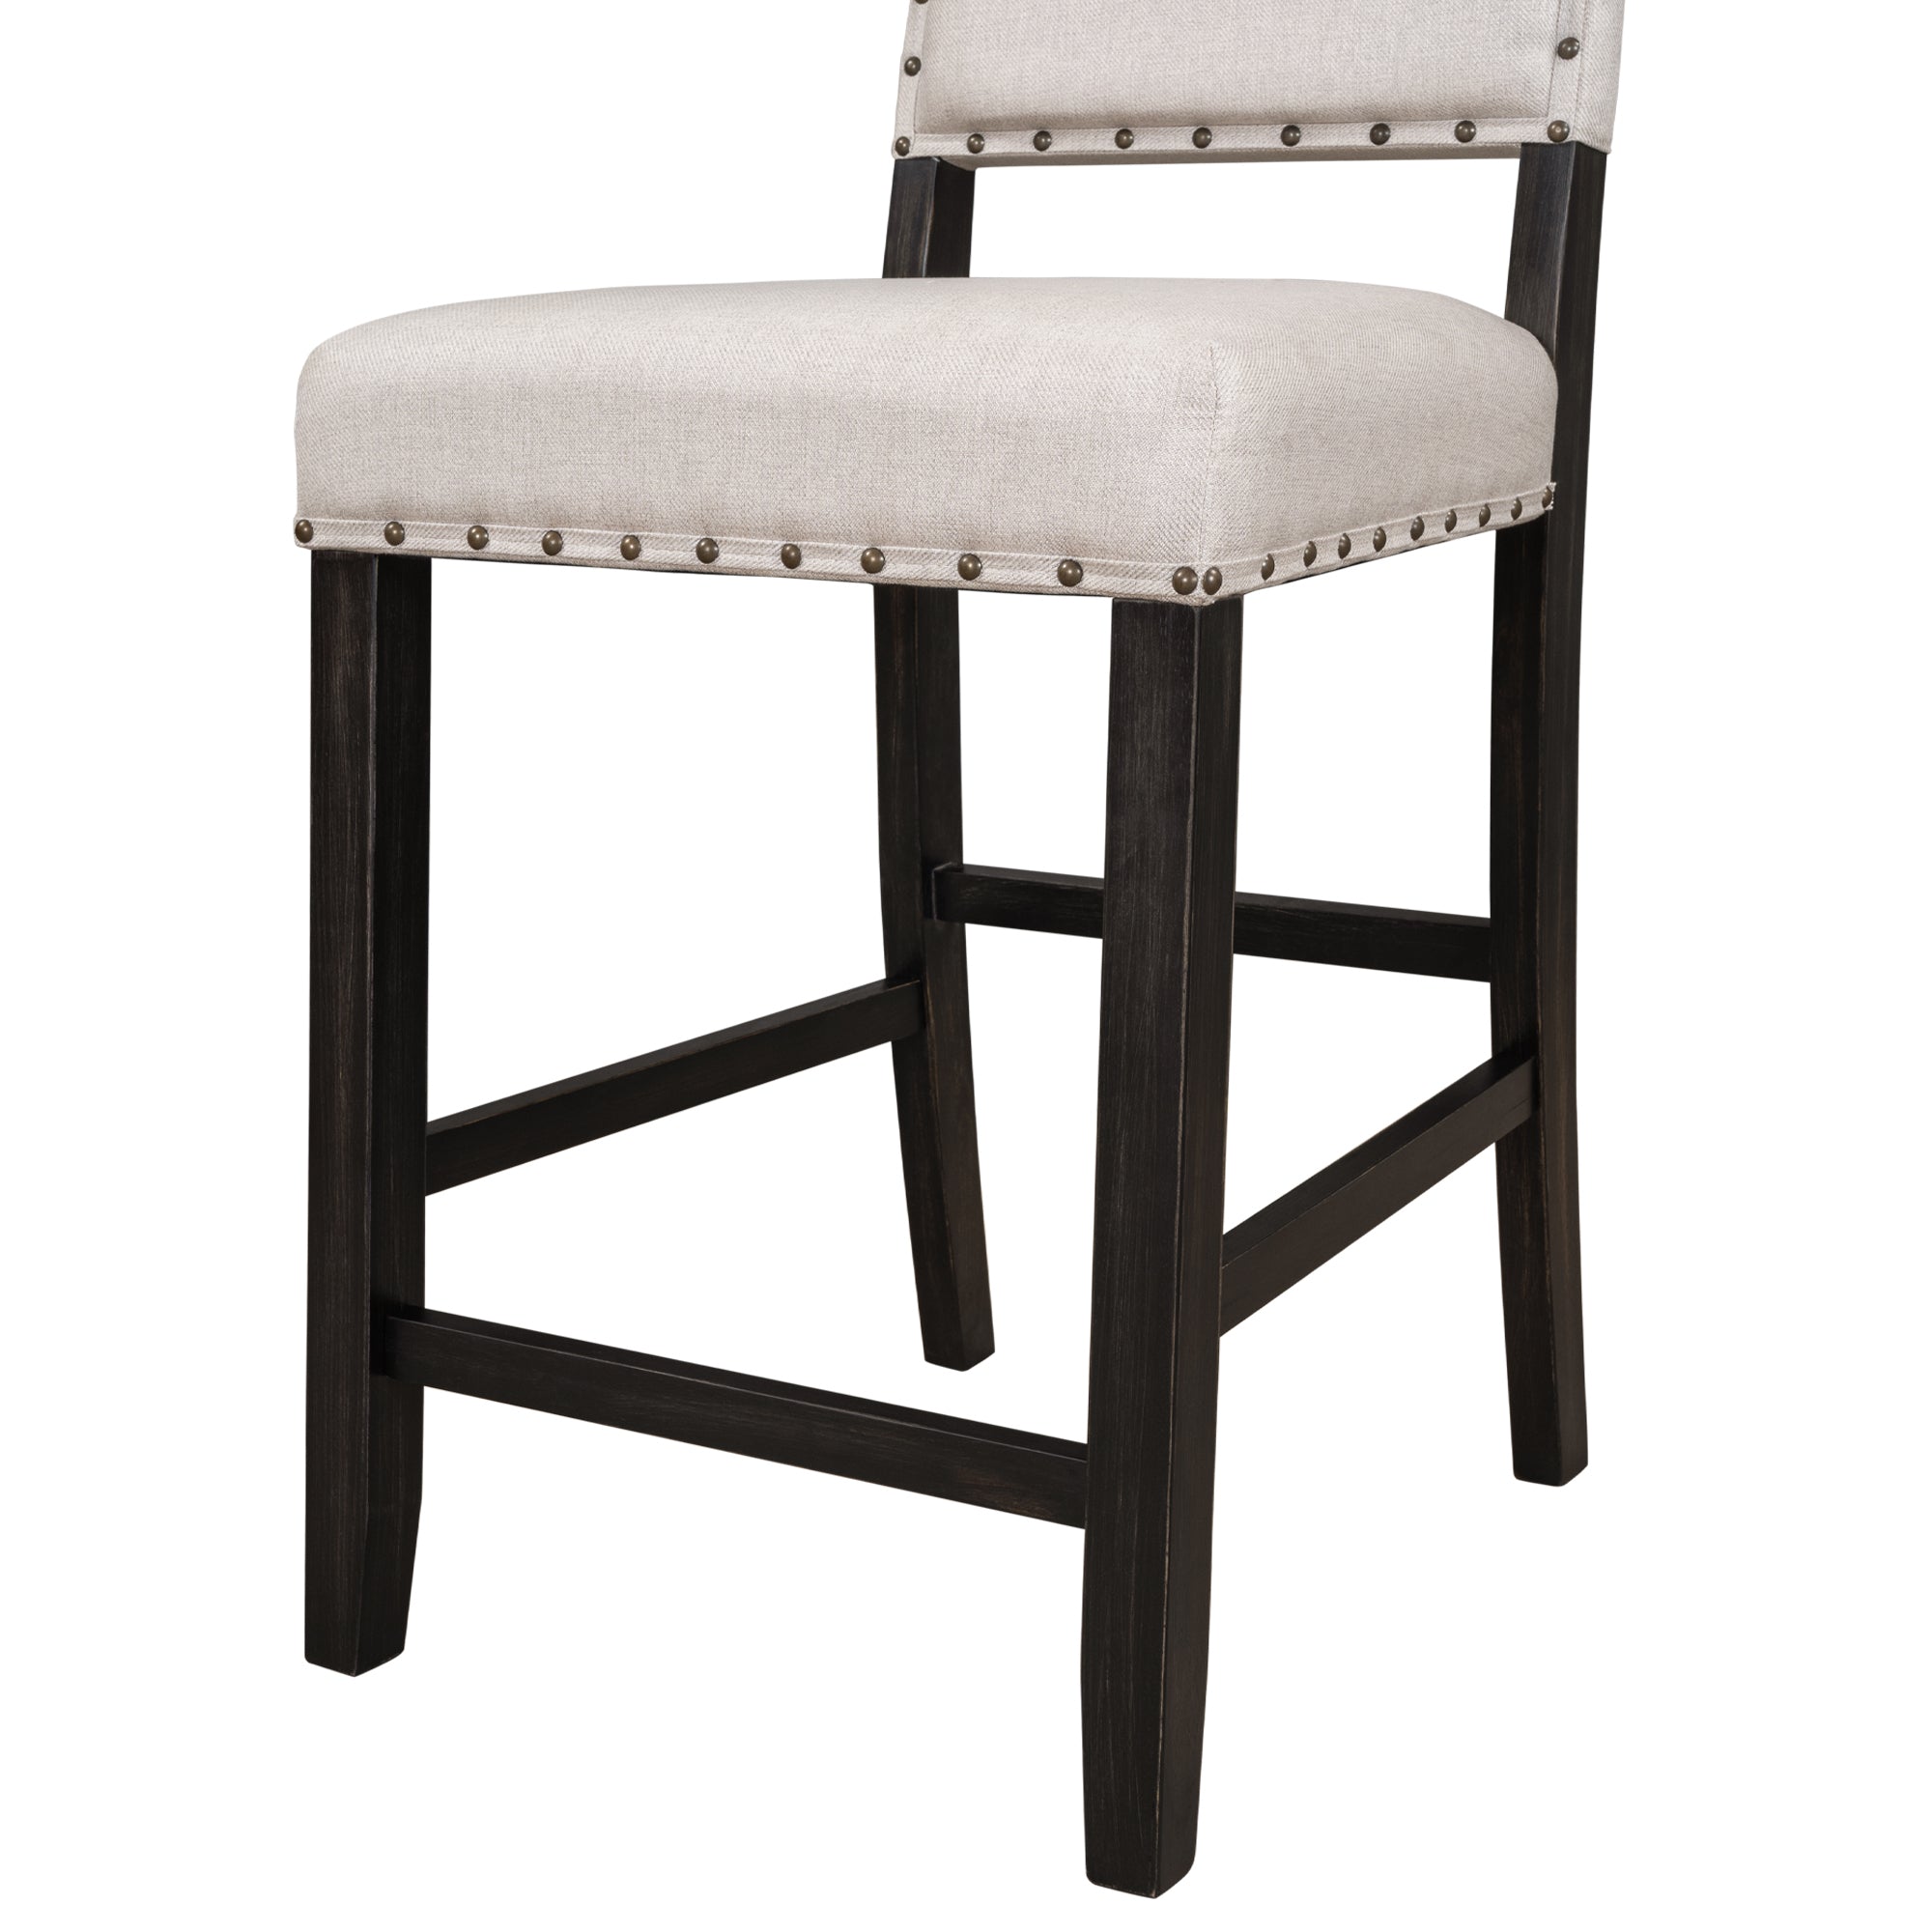 Rustic Wooden Counter Height Upholstered Dining Chairs (Set of 2) - Espresso+ Beige